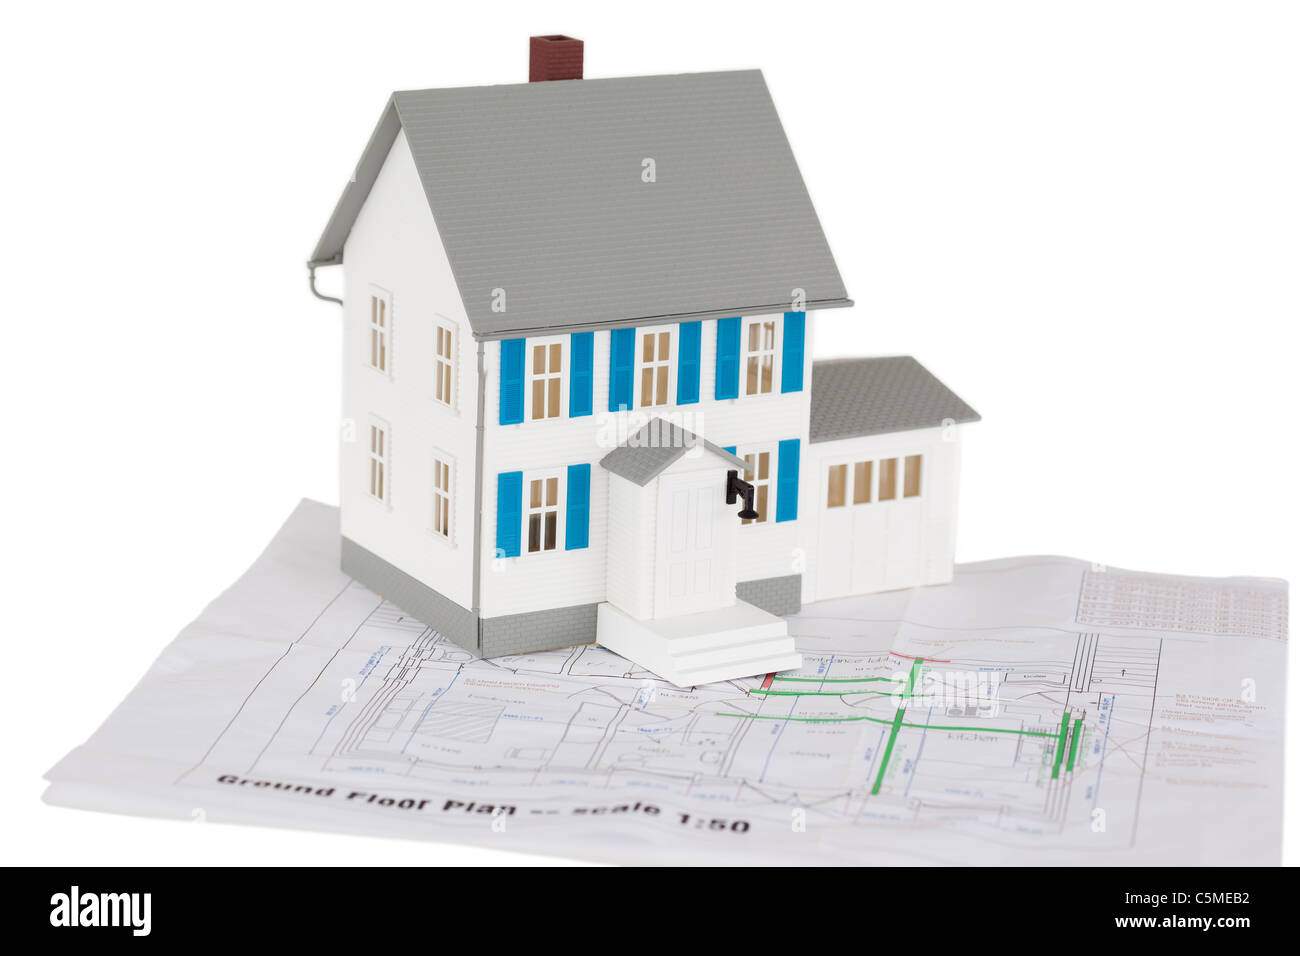 Gray toy house model on a ground floor plan Stock Photo